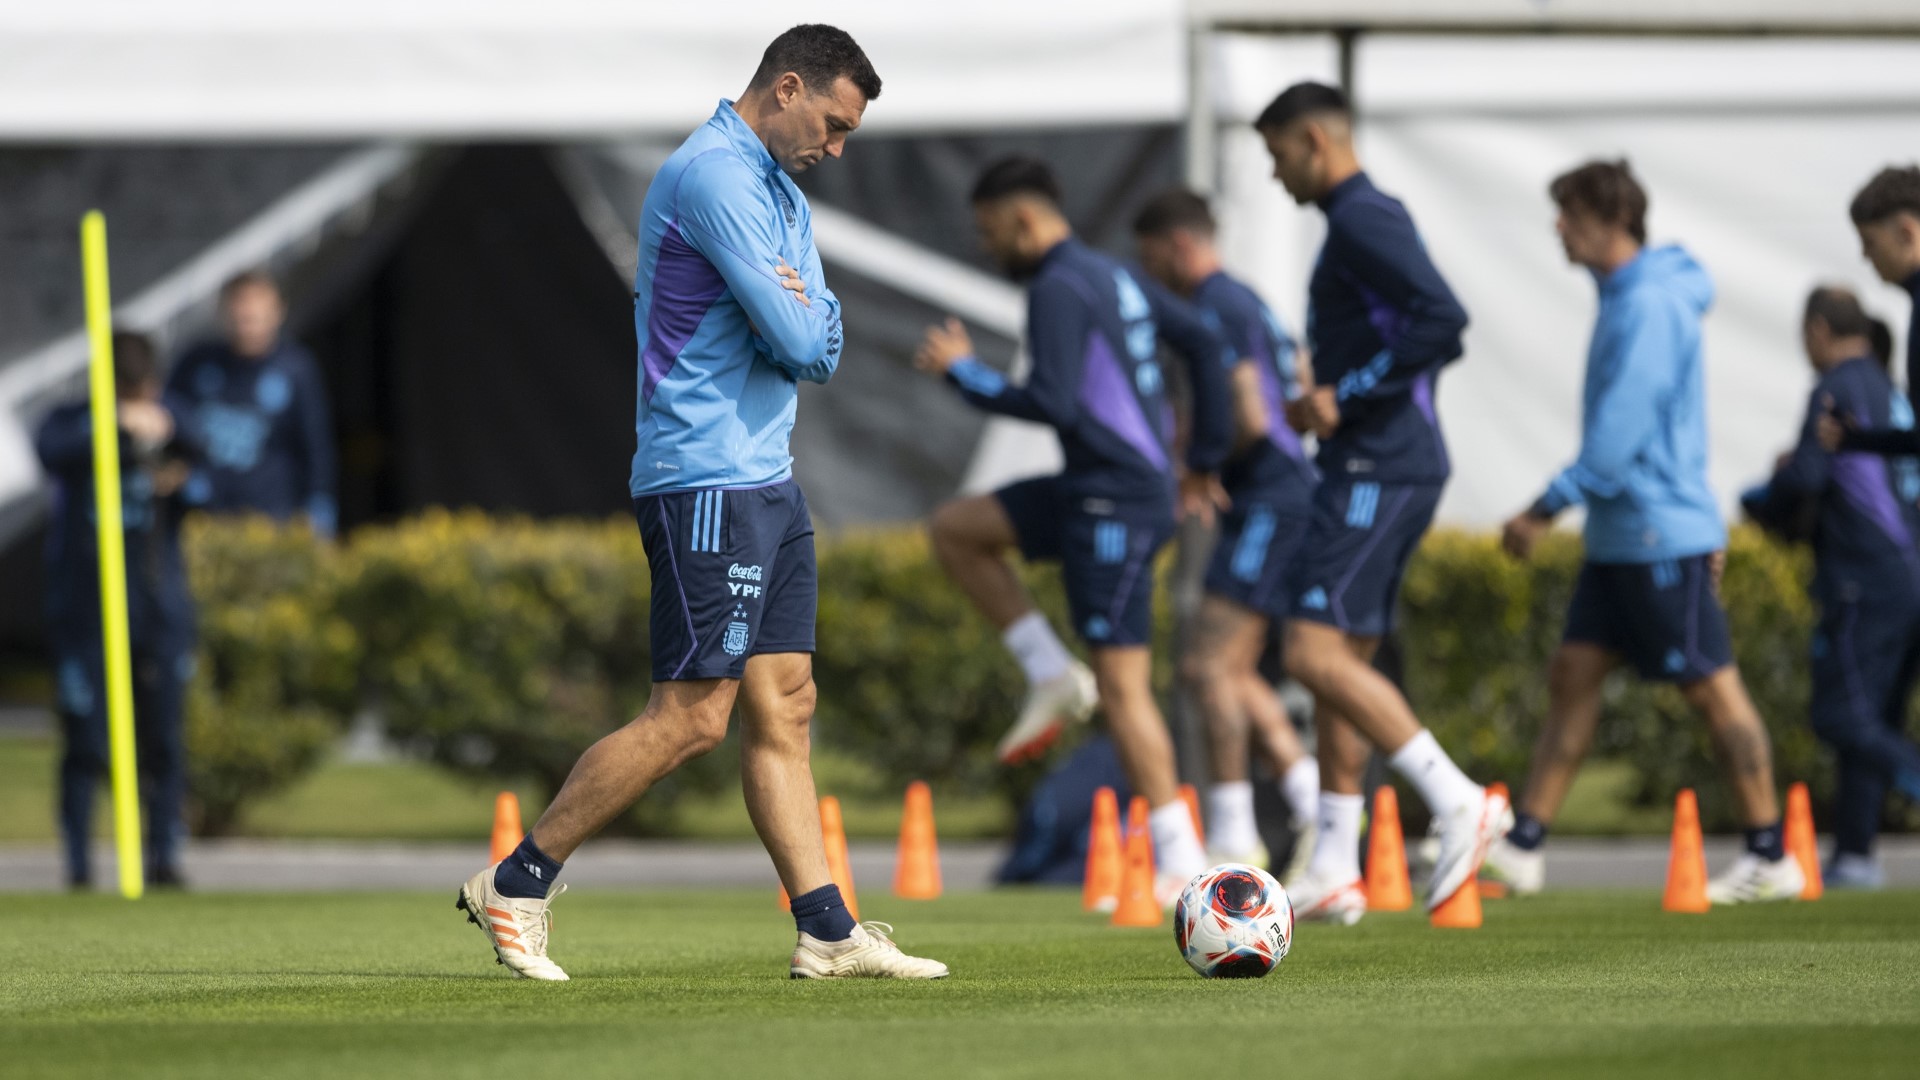 Lionel Scaloni shocks Argentina with doubts over continuity